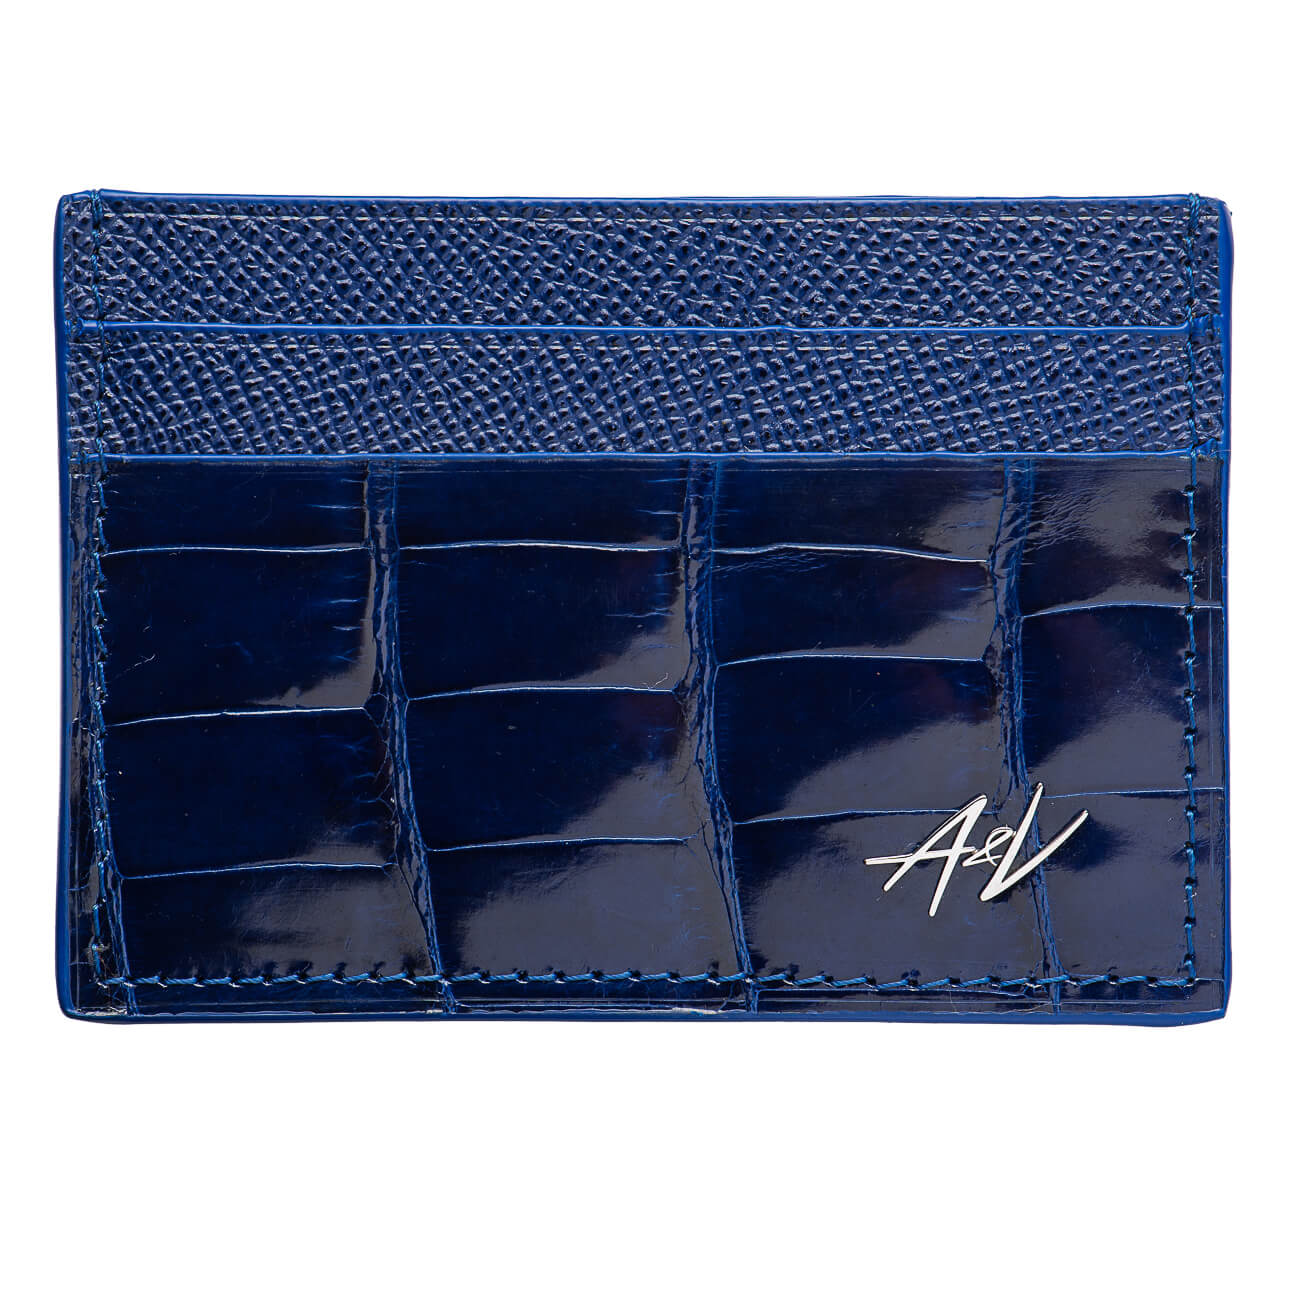 CARD HOLDER ALLIGATOR LACQUER ELECTRIC